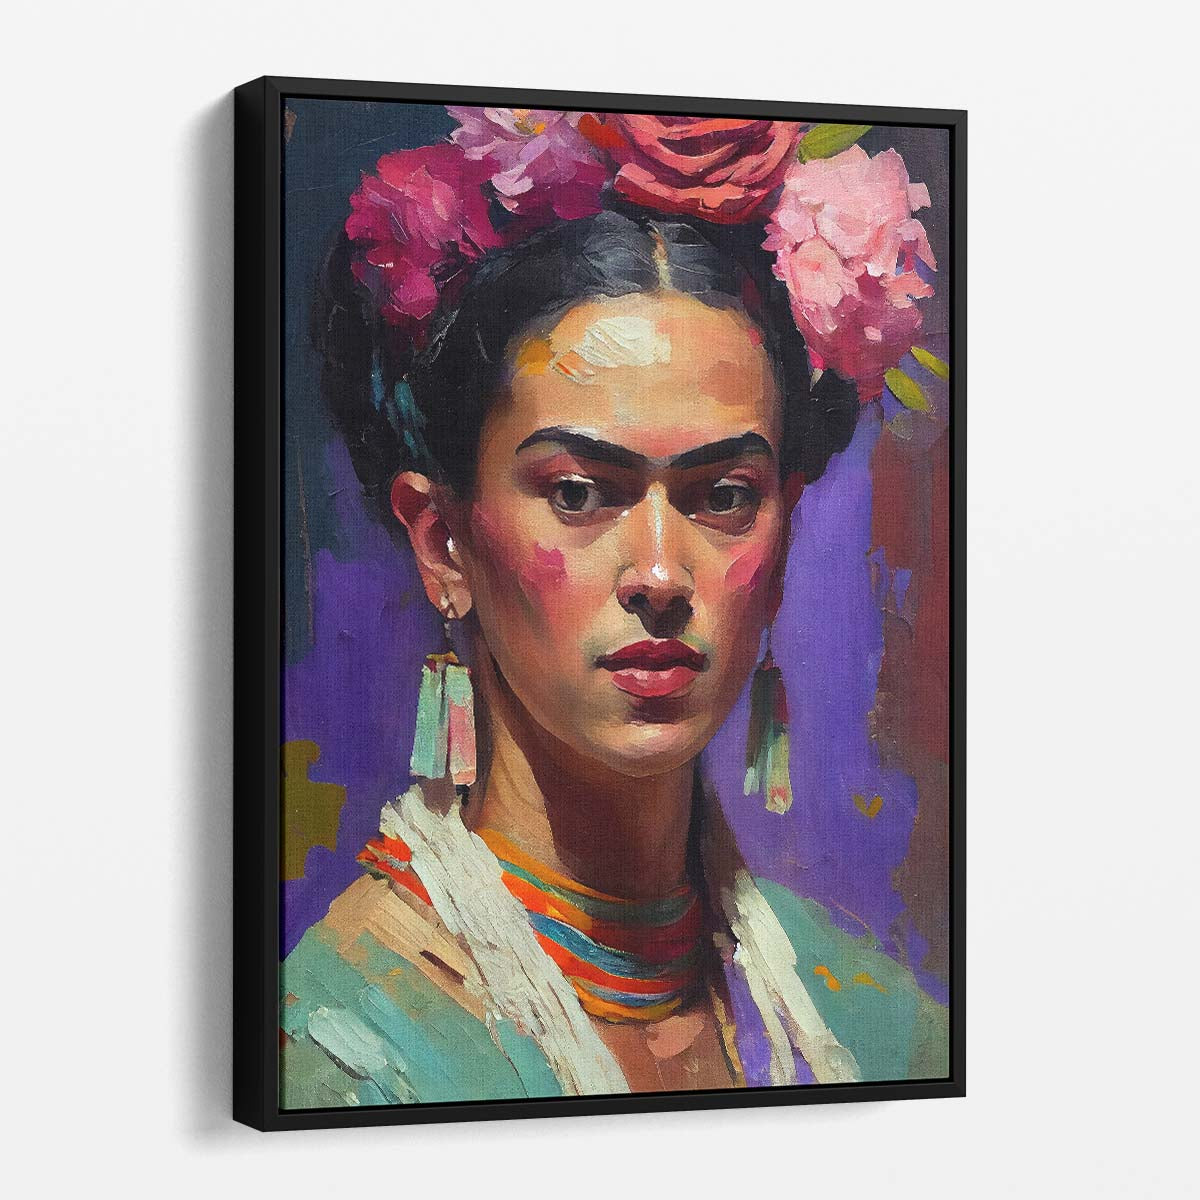 Frida Kahlo Portrait Illustration, Colorful Digital Art with Flowers by Luxuriance Designs, made in USA